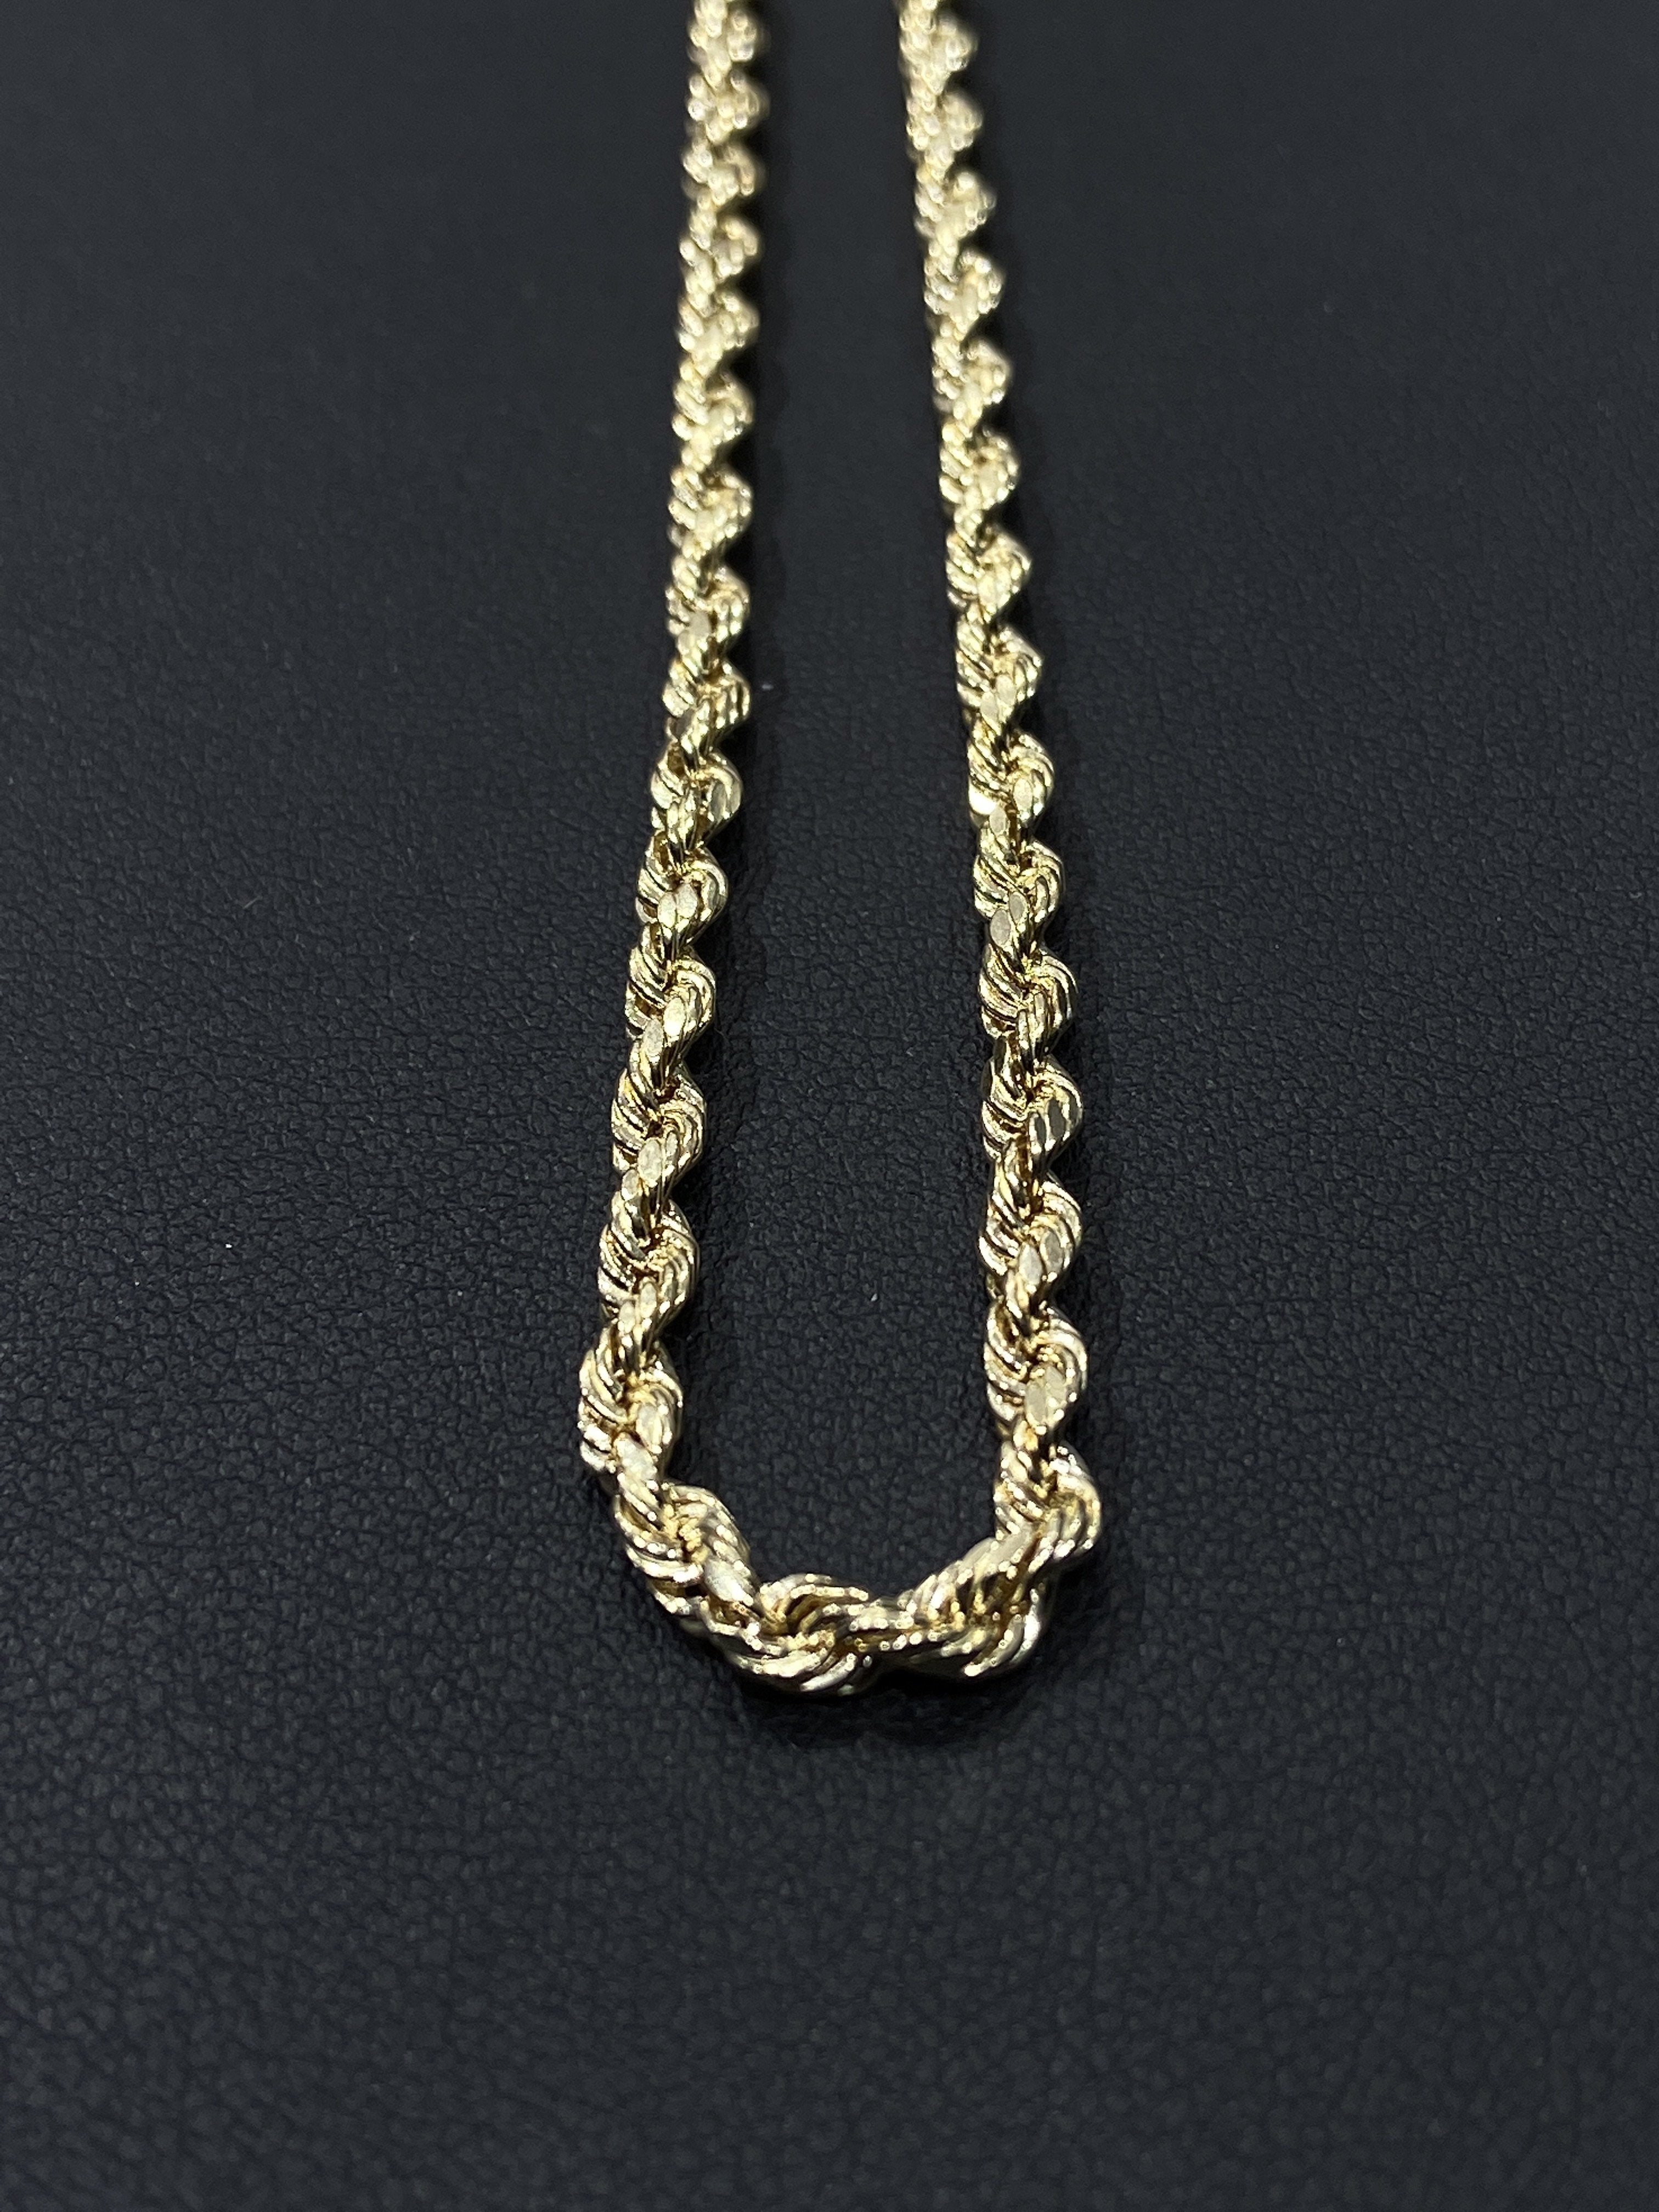 14K Solid Gold Rope Chain - 7mm - White Carat Diamonds 